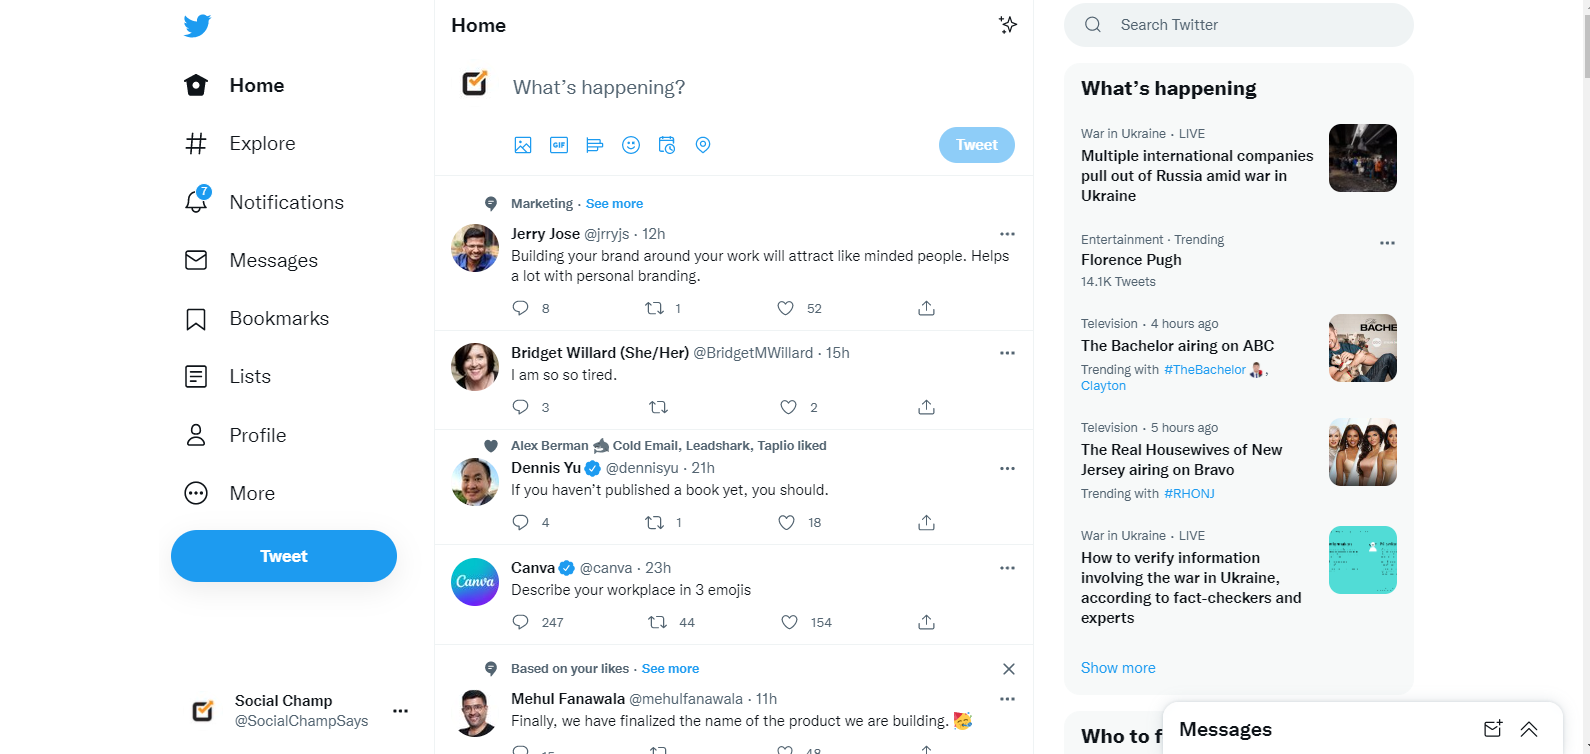 Twitter's Character Count Changes Live in Sprout